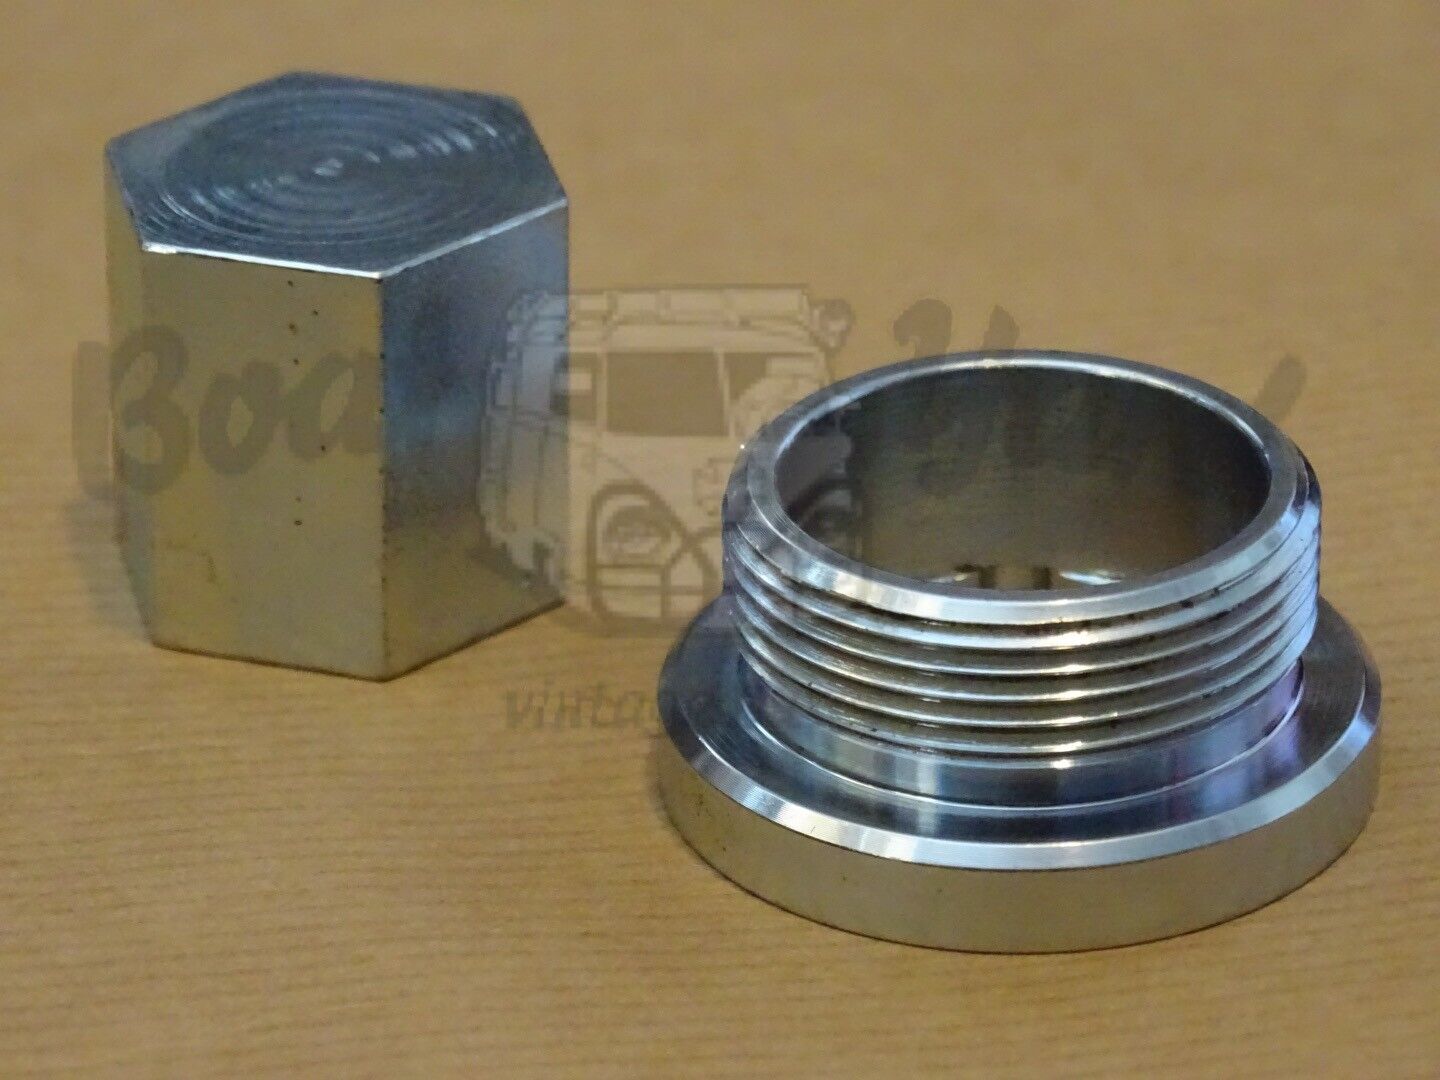 Oil filler neck special nut and tool